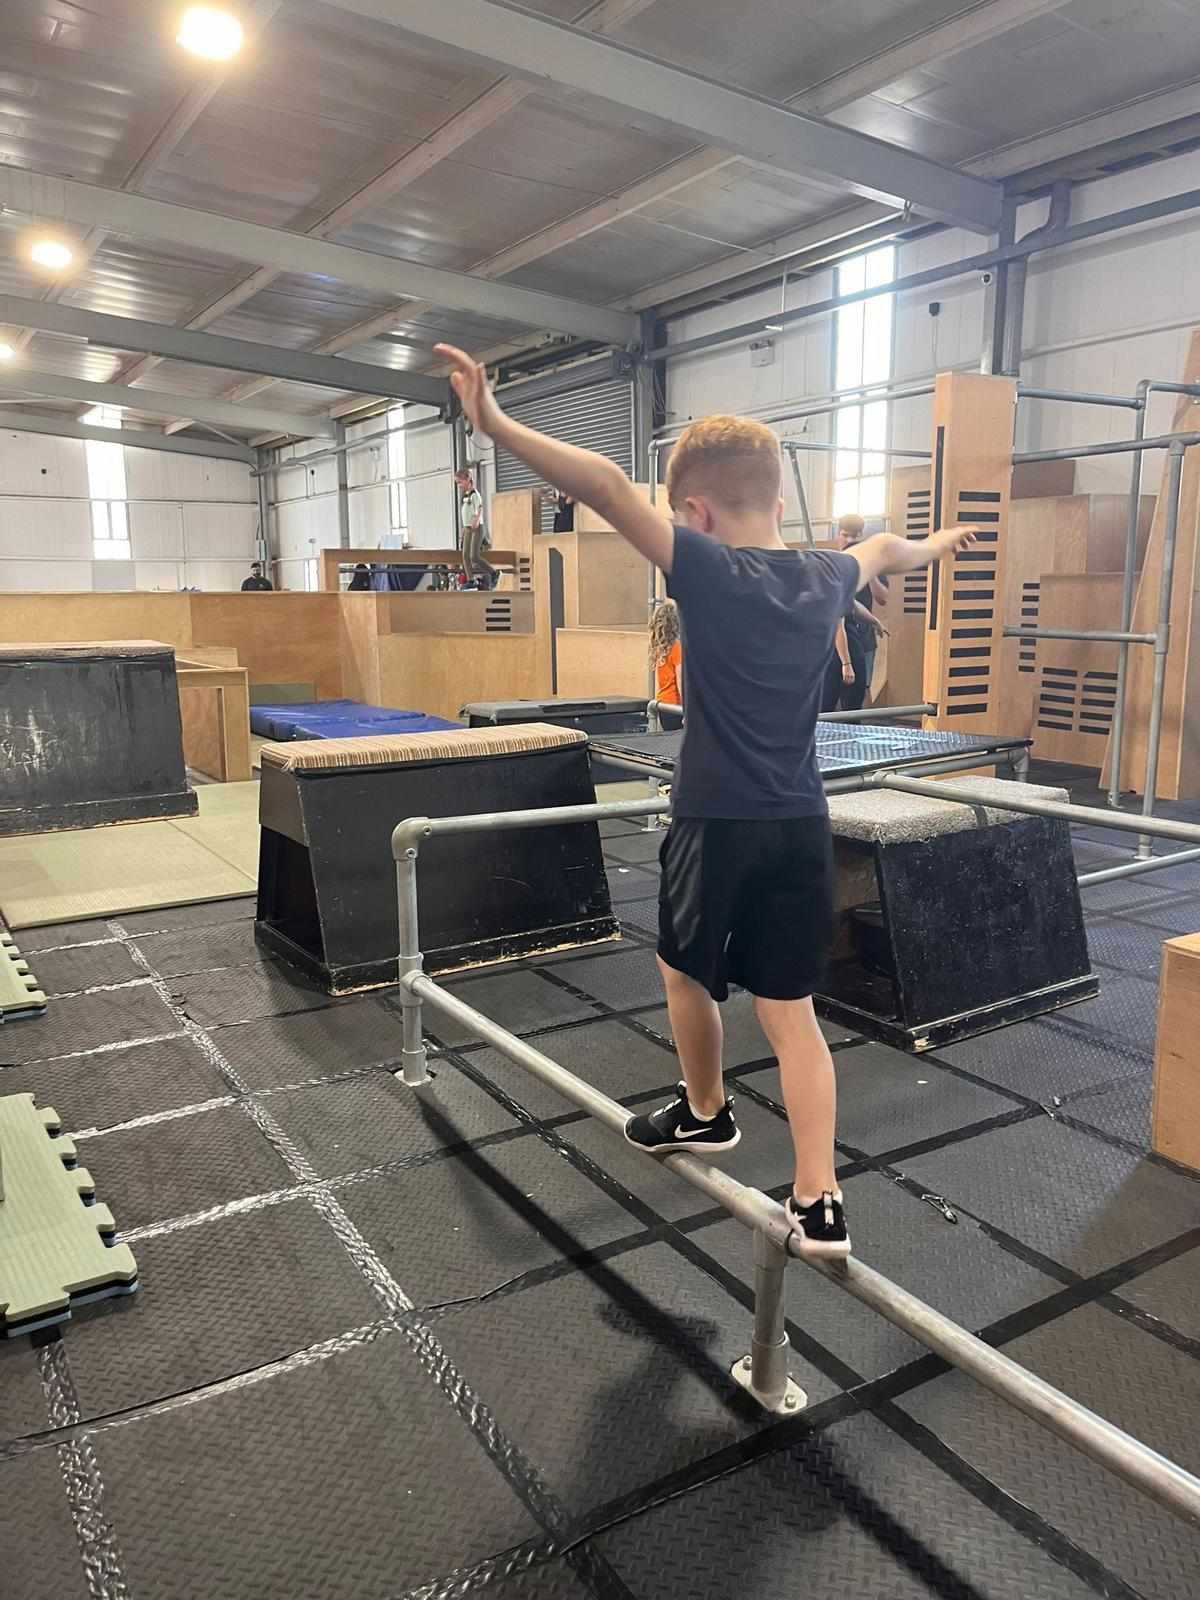 A gym full of climbing obstacles for young children.